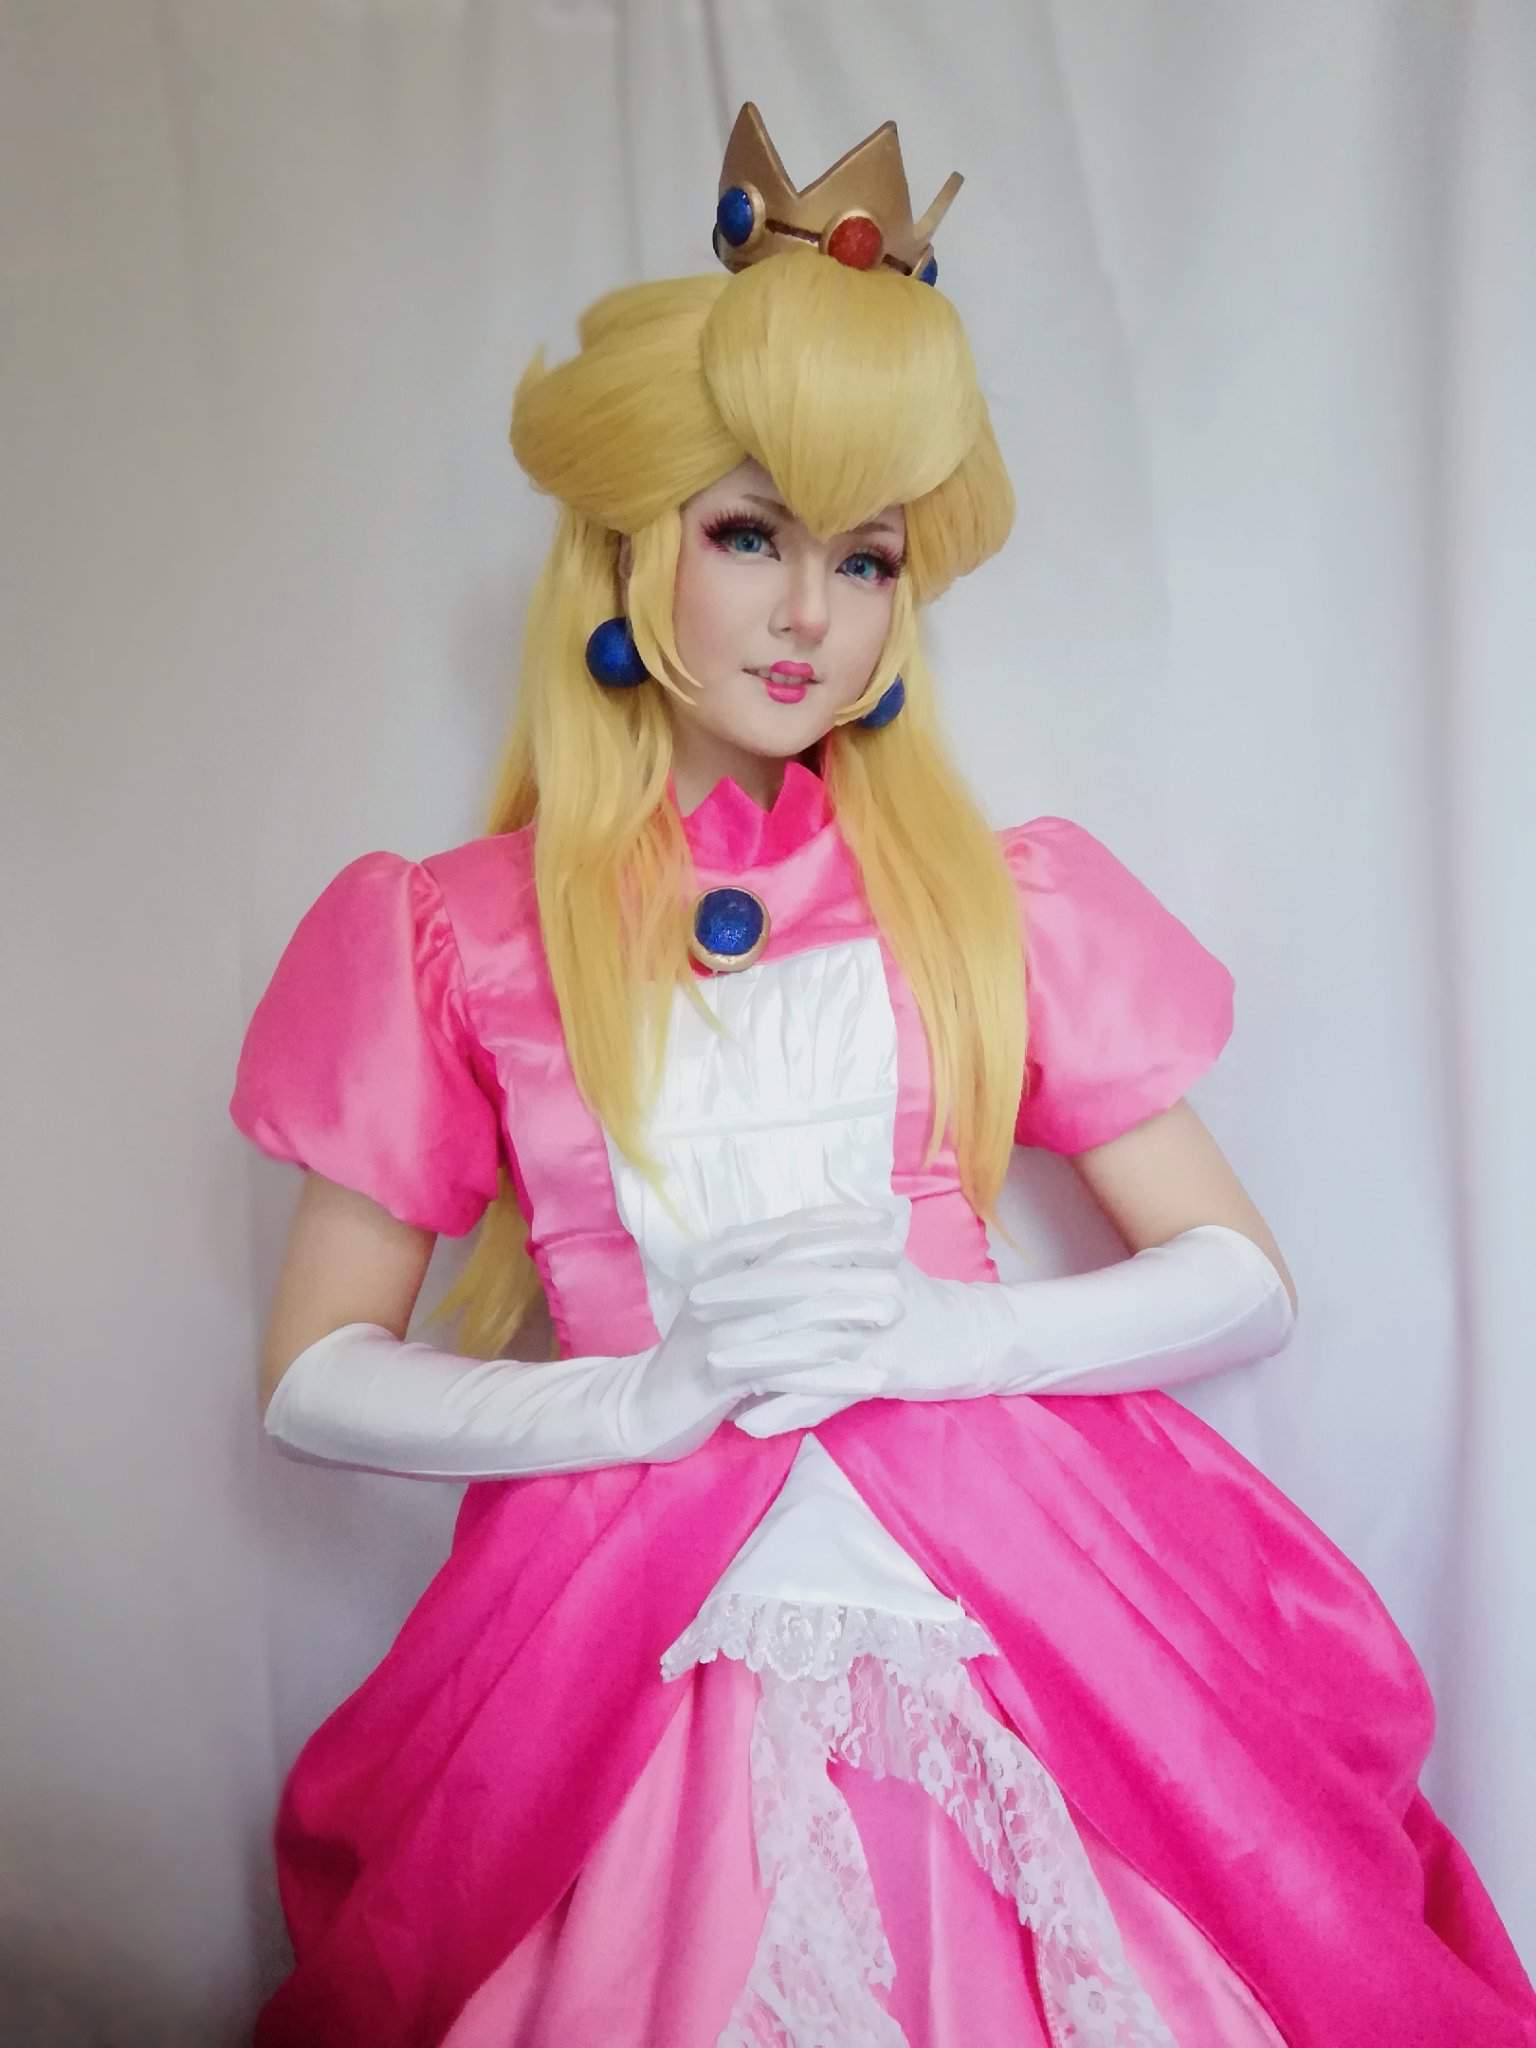 And cosplay peaches The Hungry